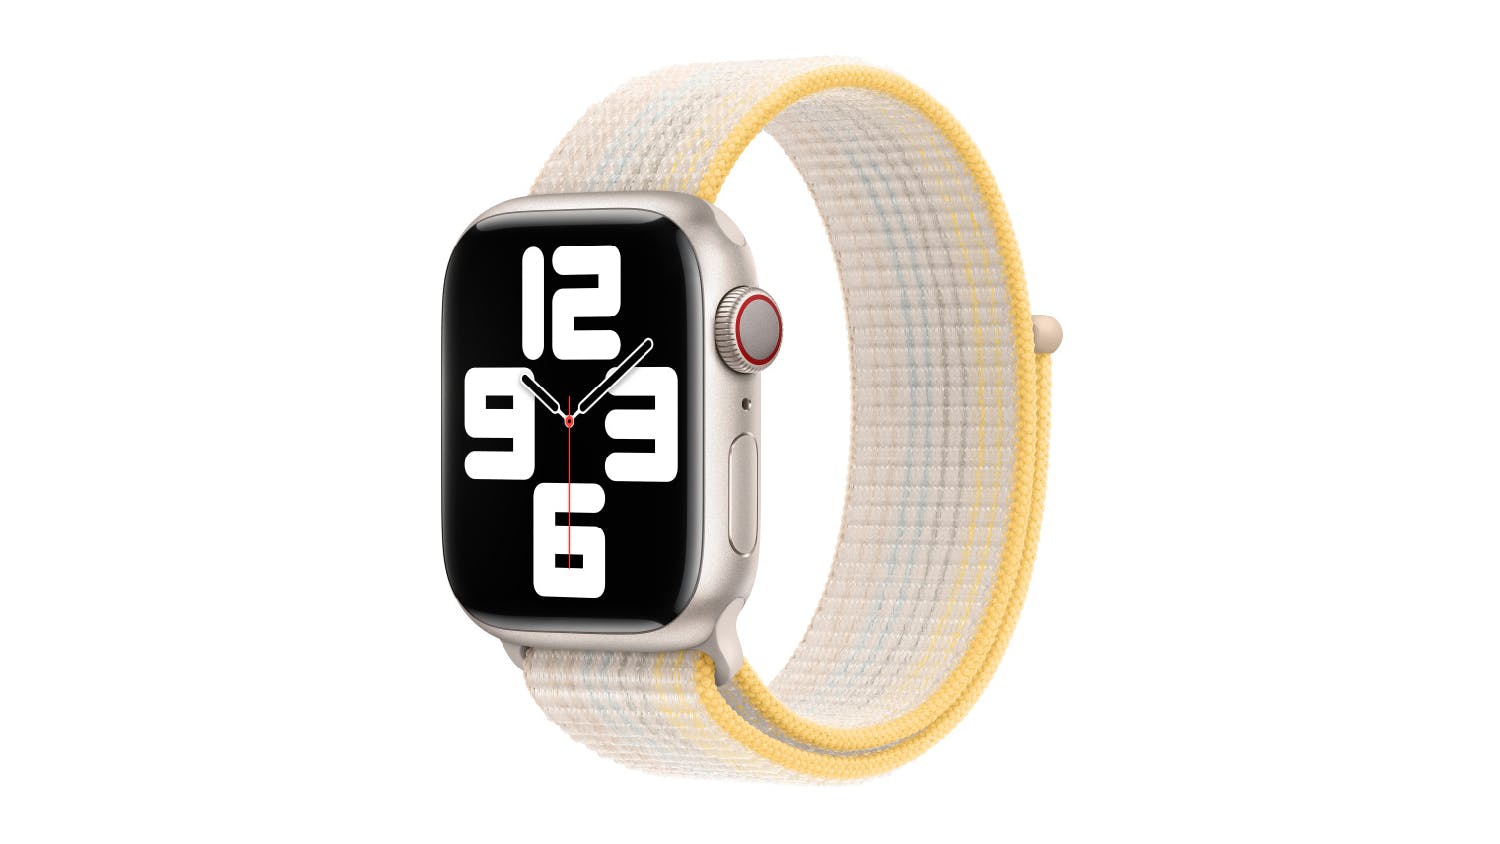 Apple Silicone Sport Loop Watch Strap for Apple Watch 41mm - Starlight